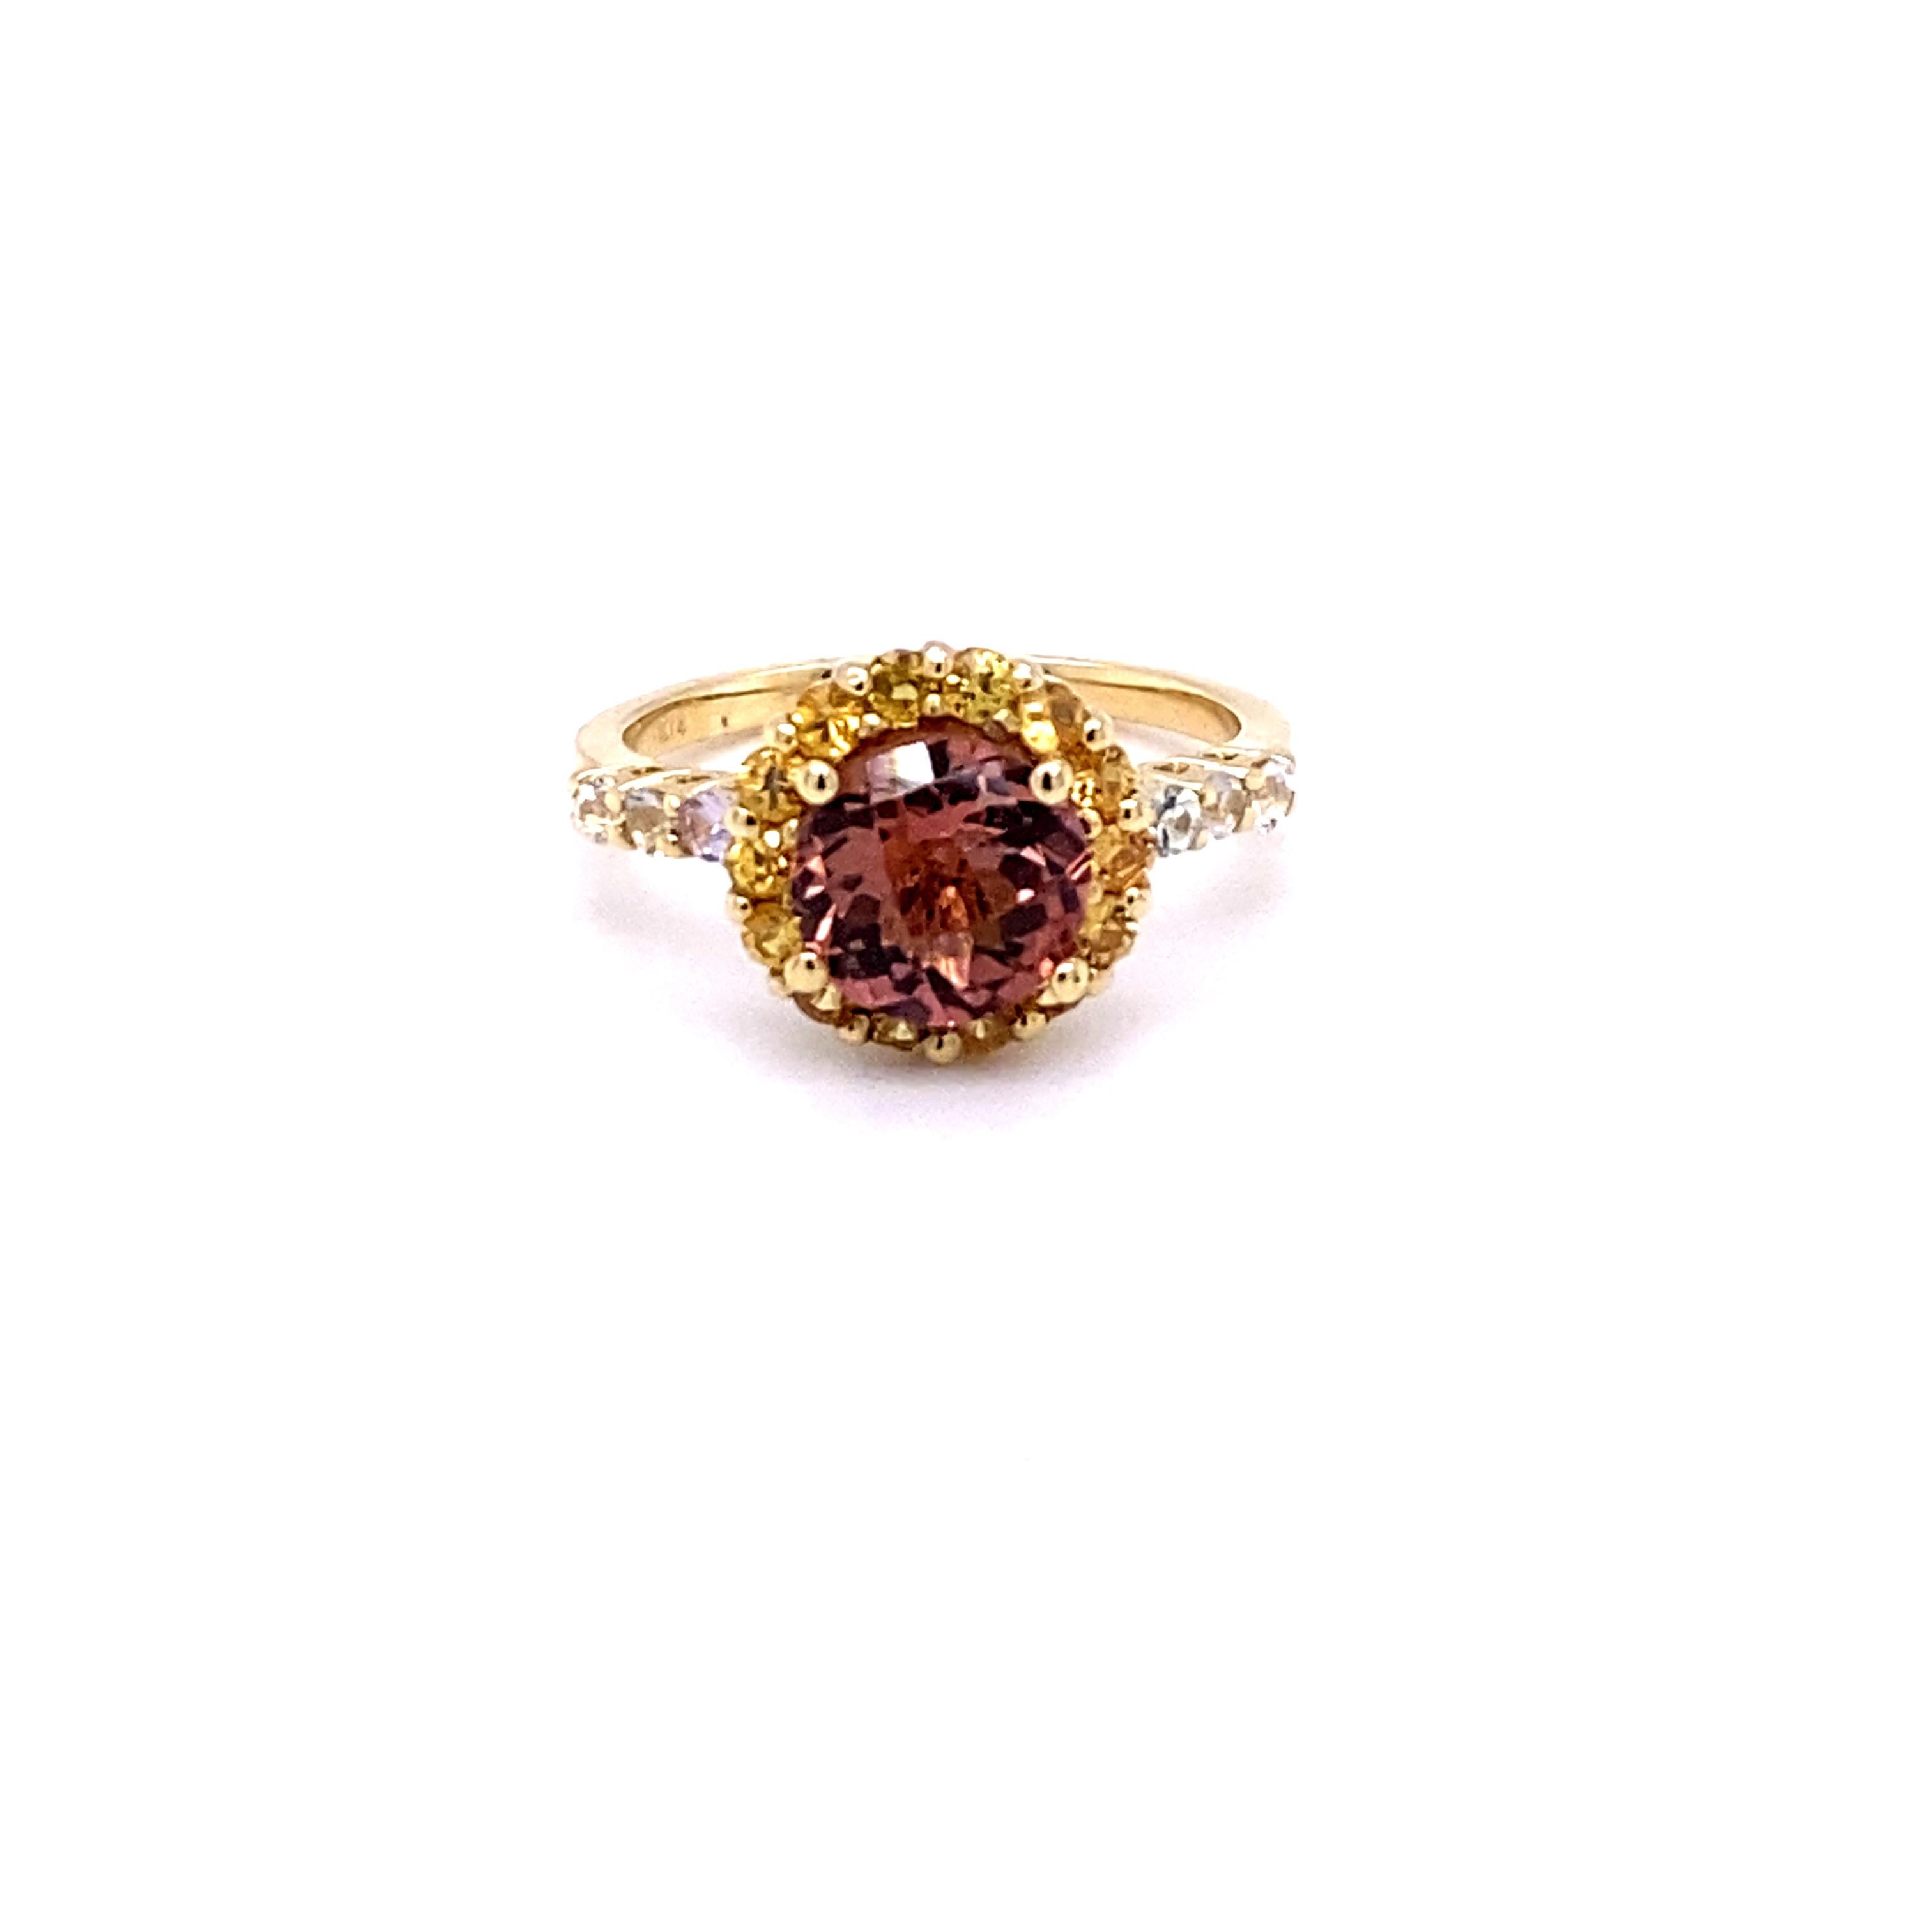 This ring has a 1.53 carat Round-Checkered Cut Tourmaline that is set in the center of the ring and is surrounded by 14 Yellow Sapphires that weigh 0.55 carats and 6 White Sapphires along the shank of the ring that weighs 0.29 carats . The total